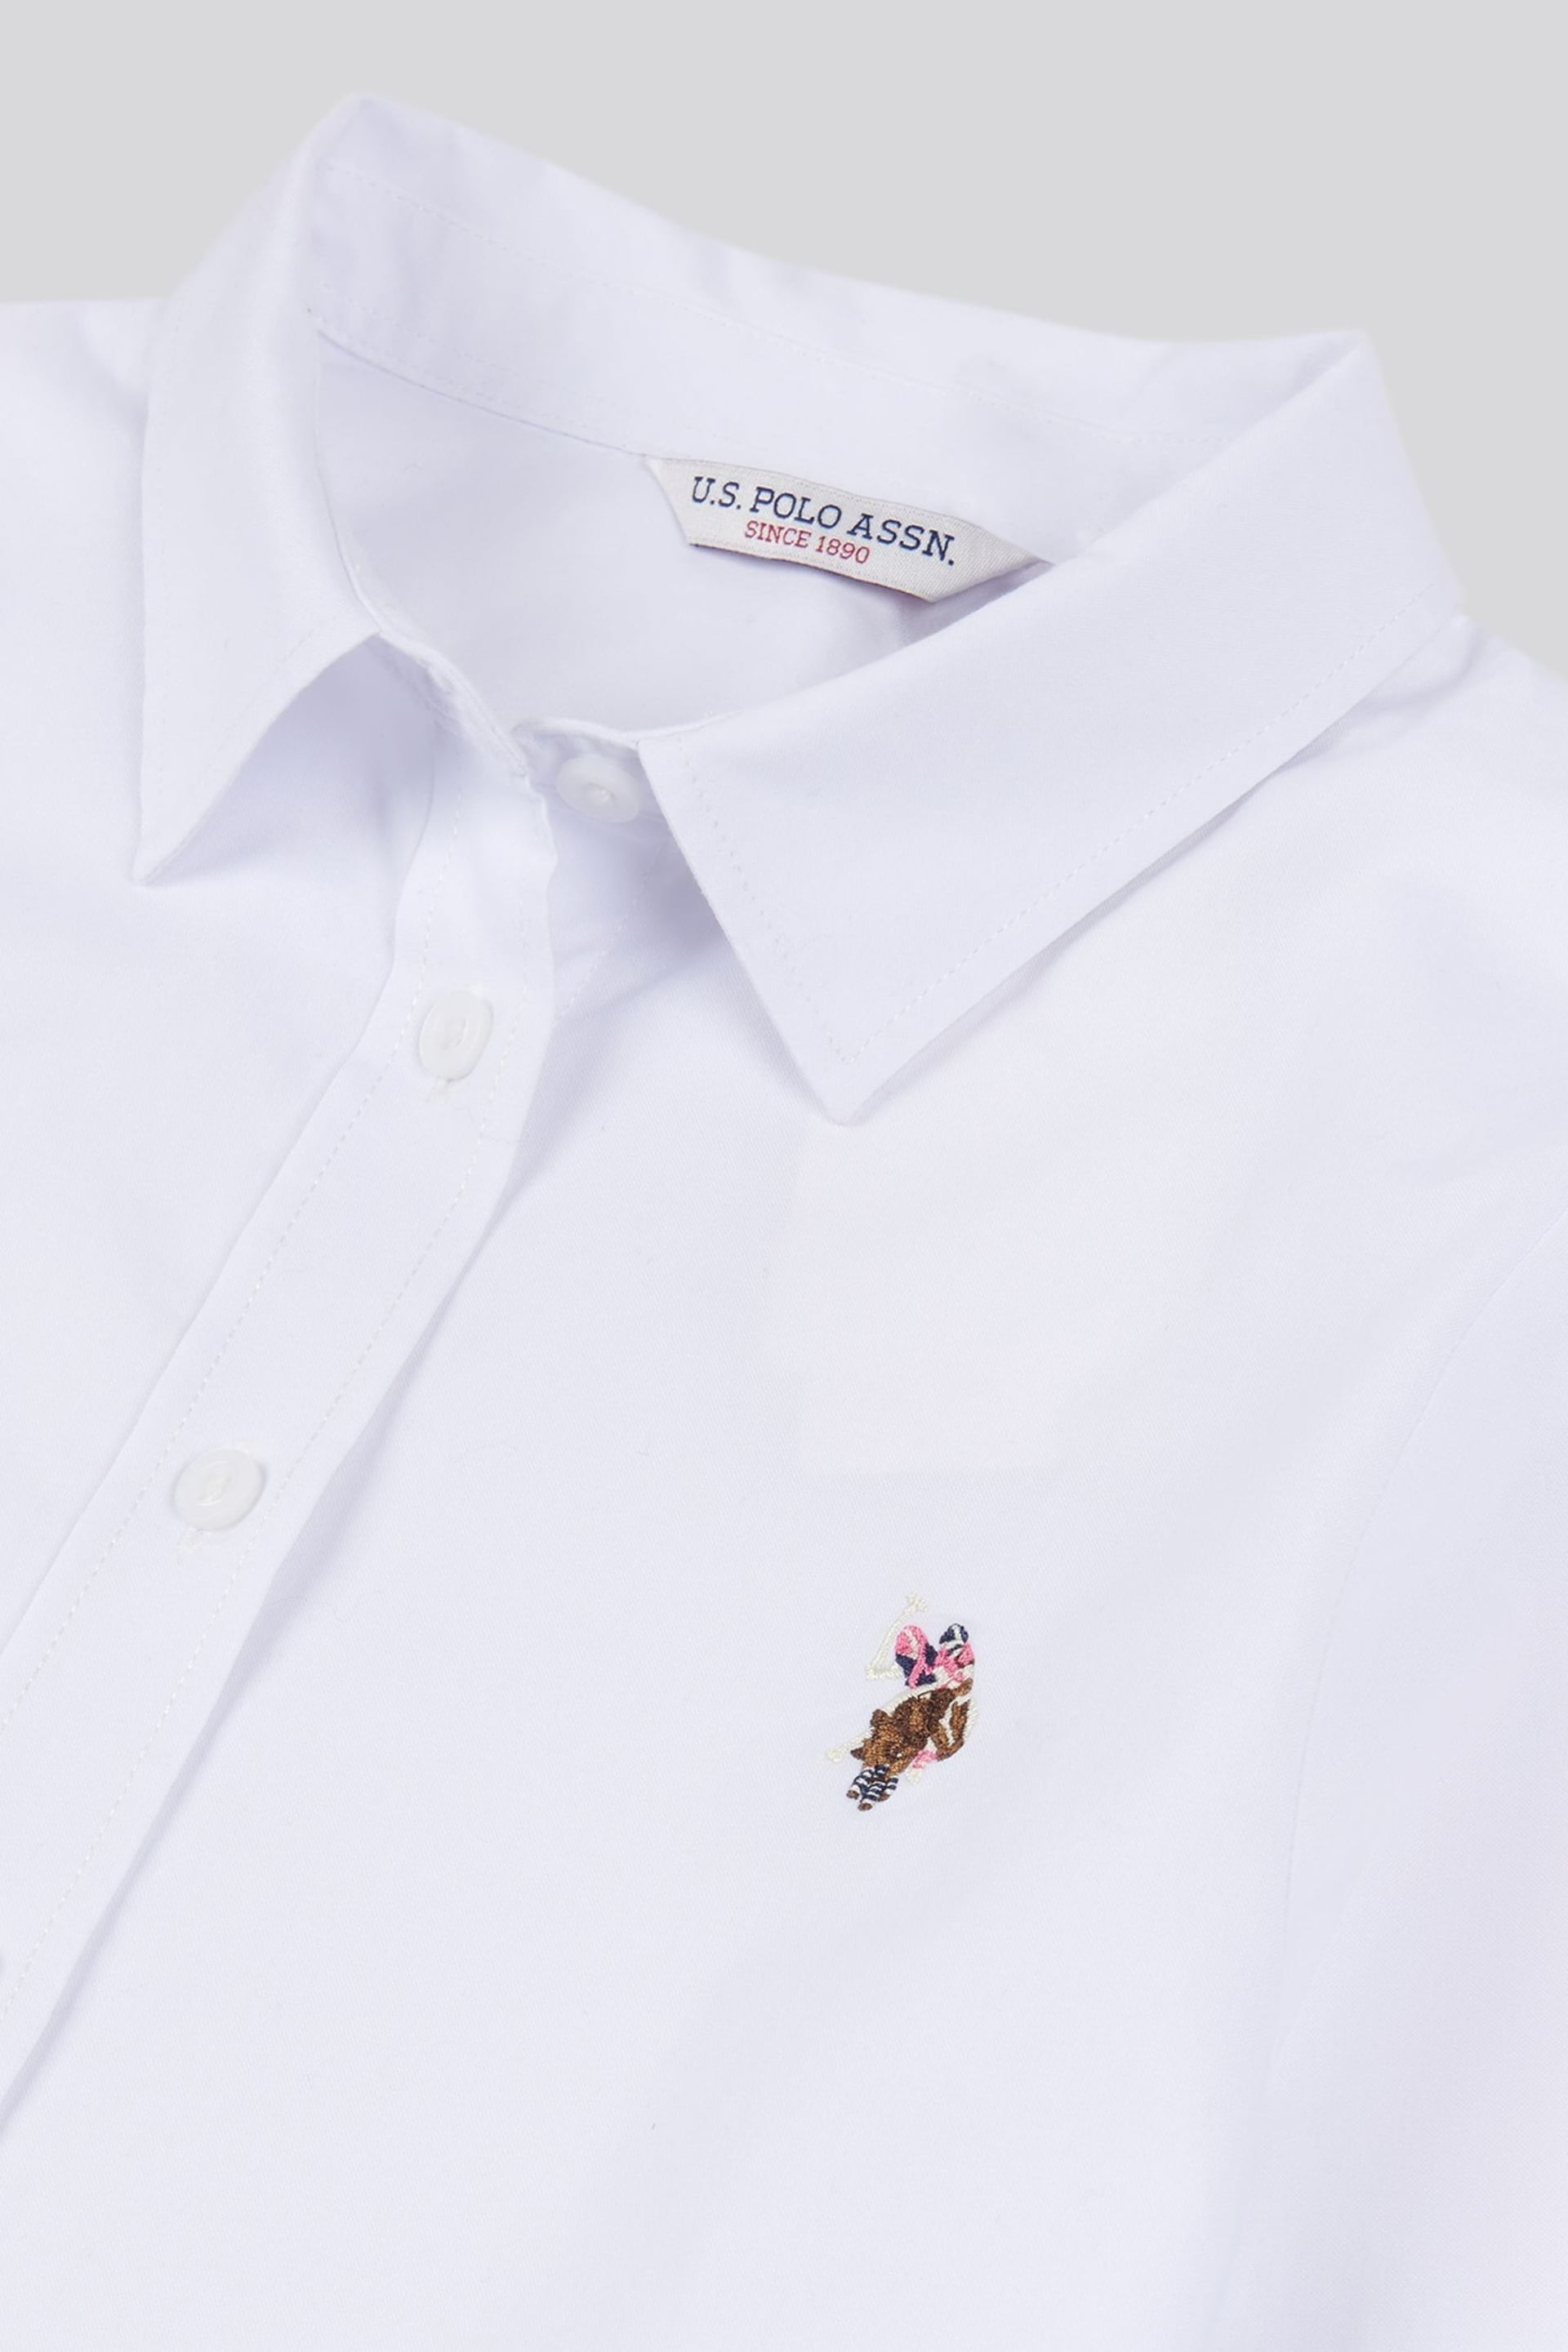 U.S. Polo Assn. Womens Classic Fit Oxford Shirt - Image 8 of 8